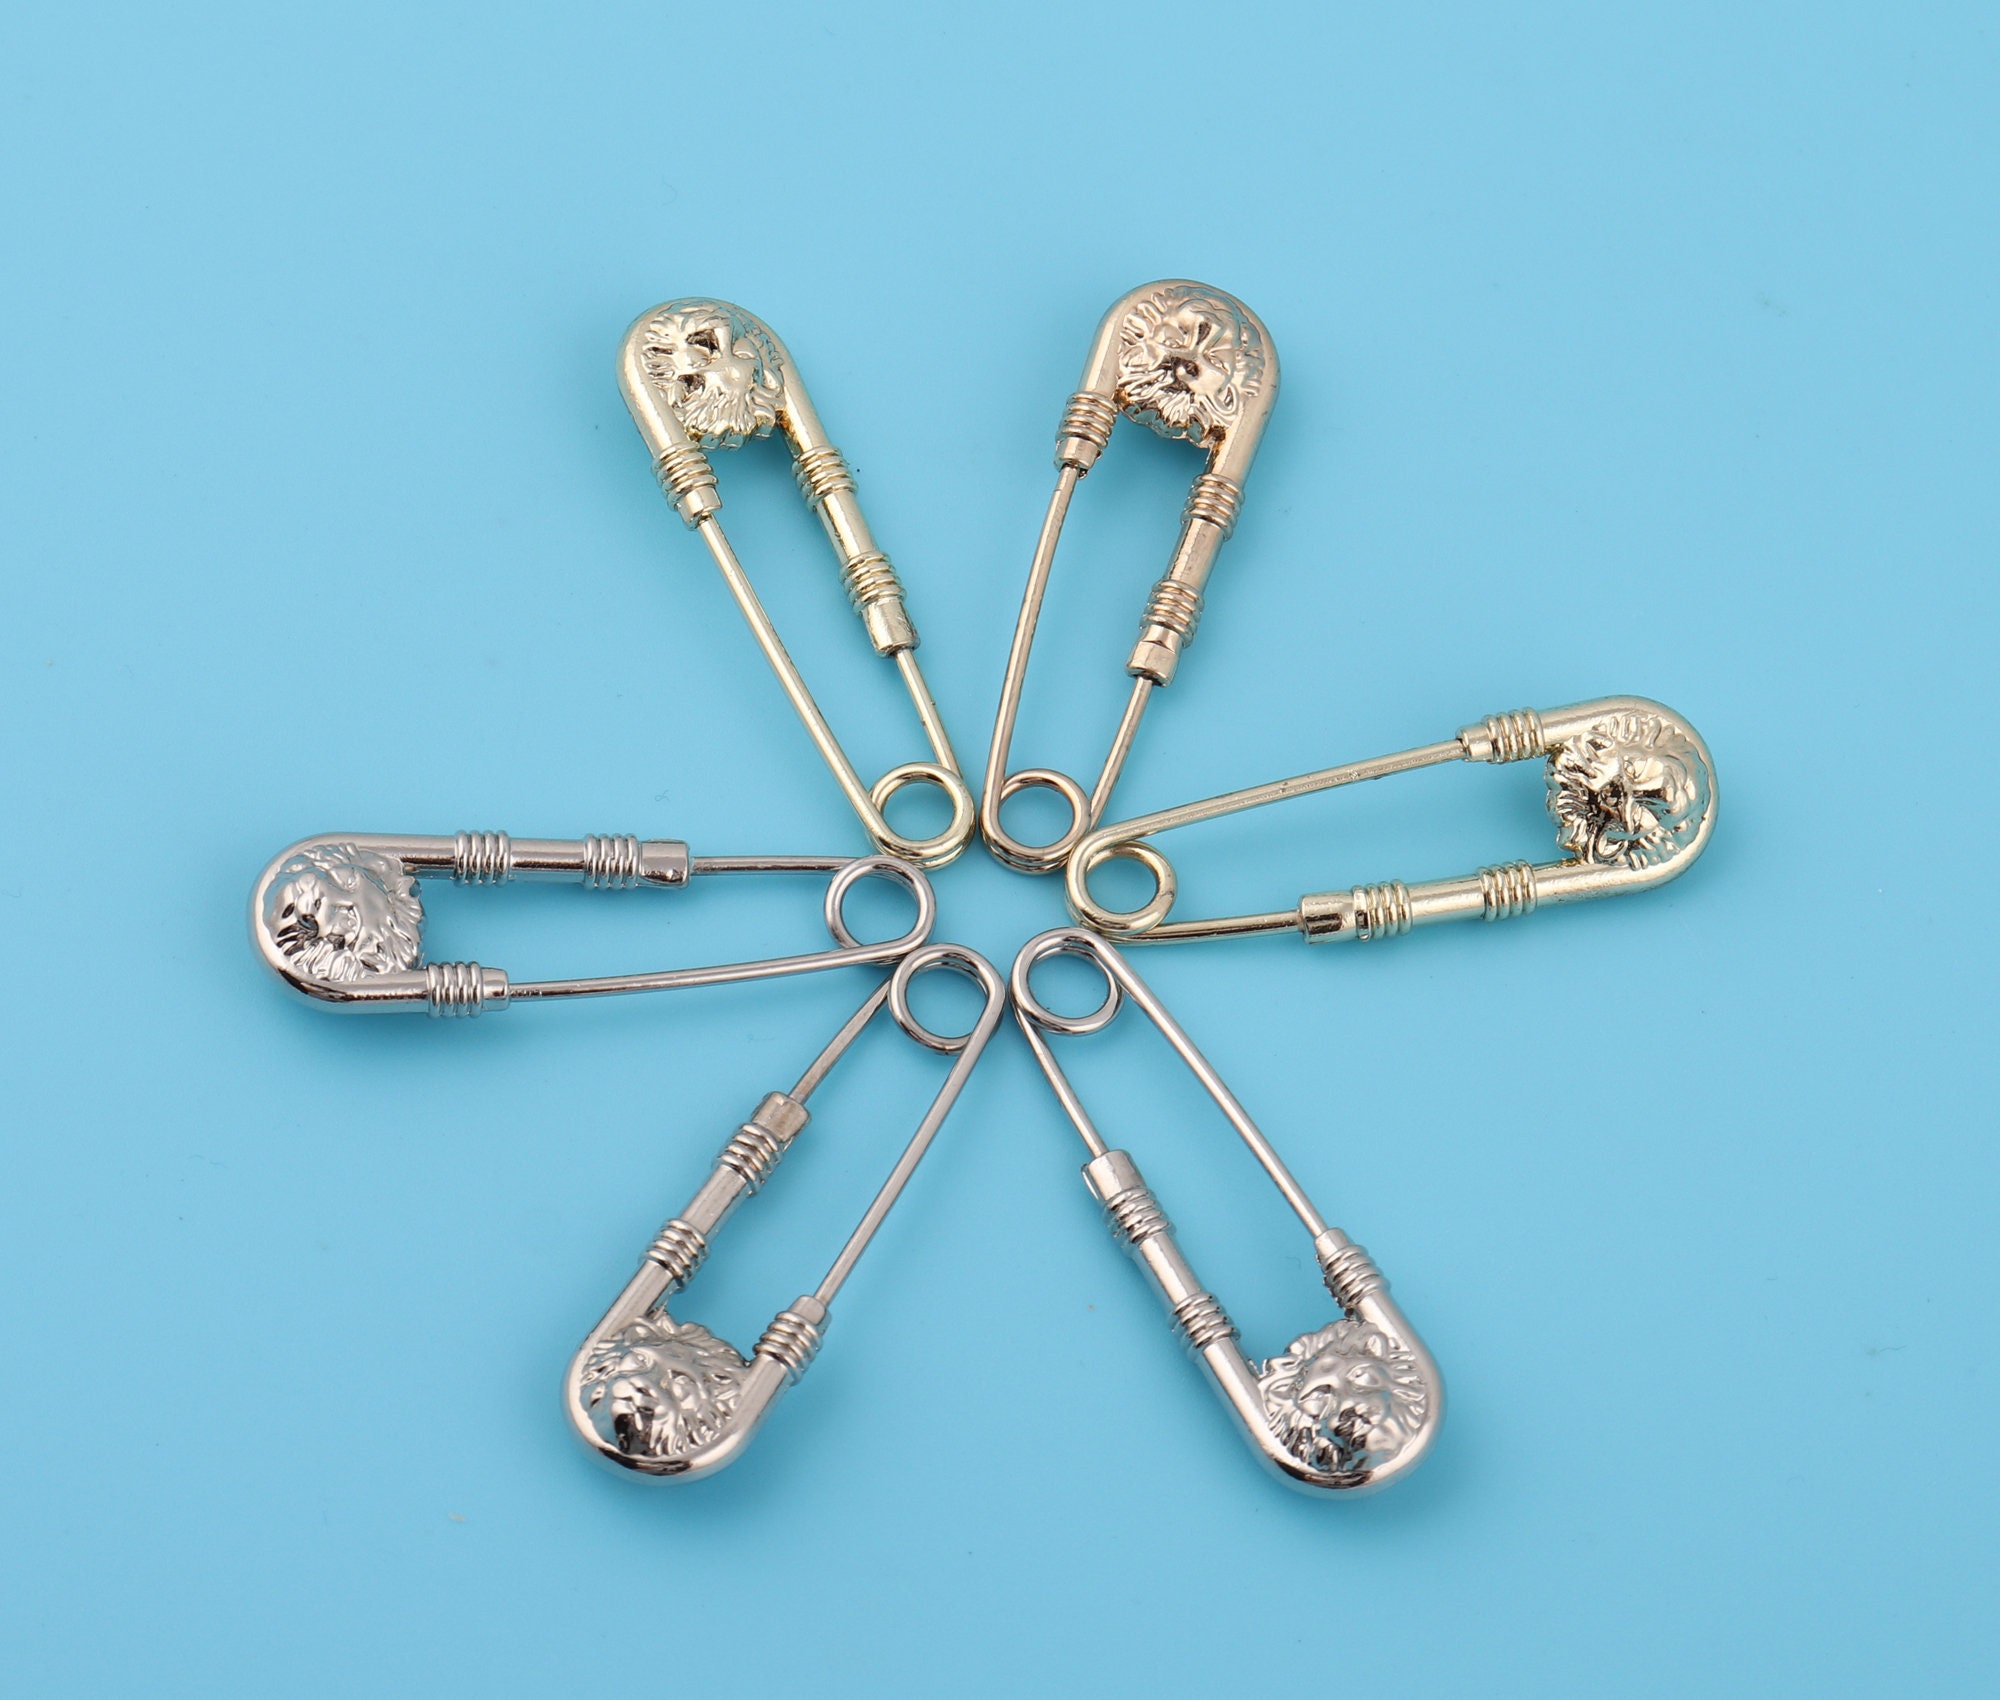 Safety Pin/diaper Pin Decorative Brads 12 Pack, 18mm FREE SHIPPING 